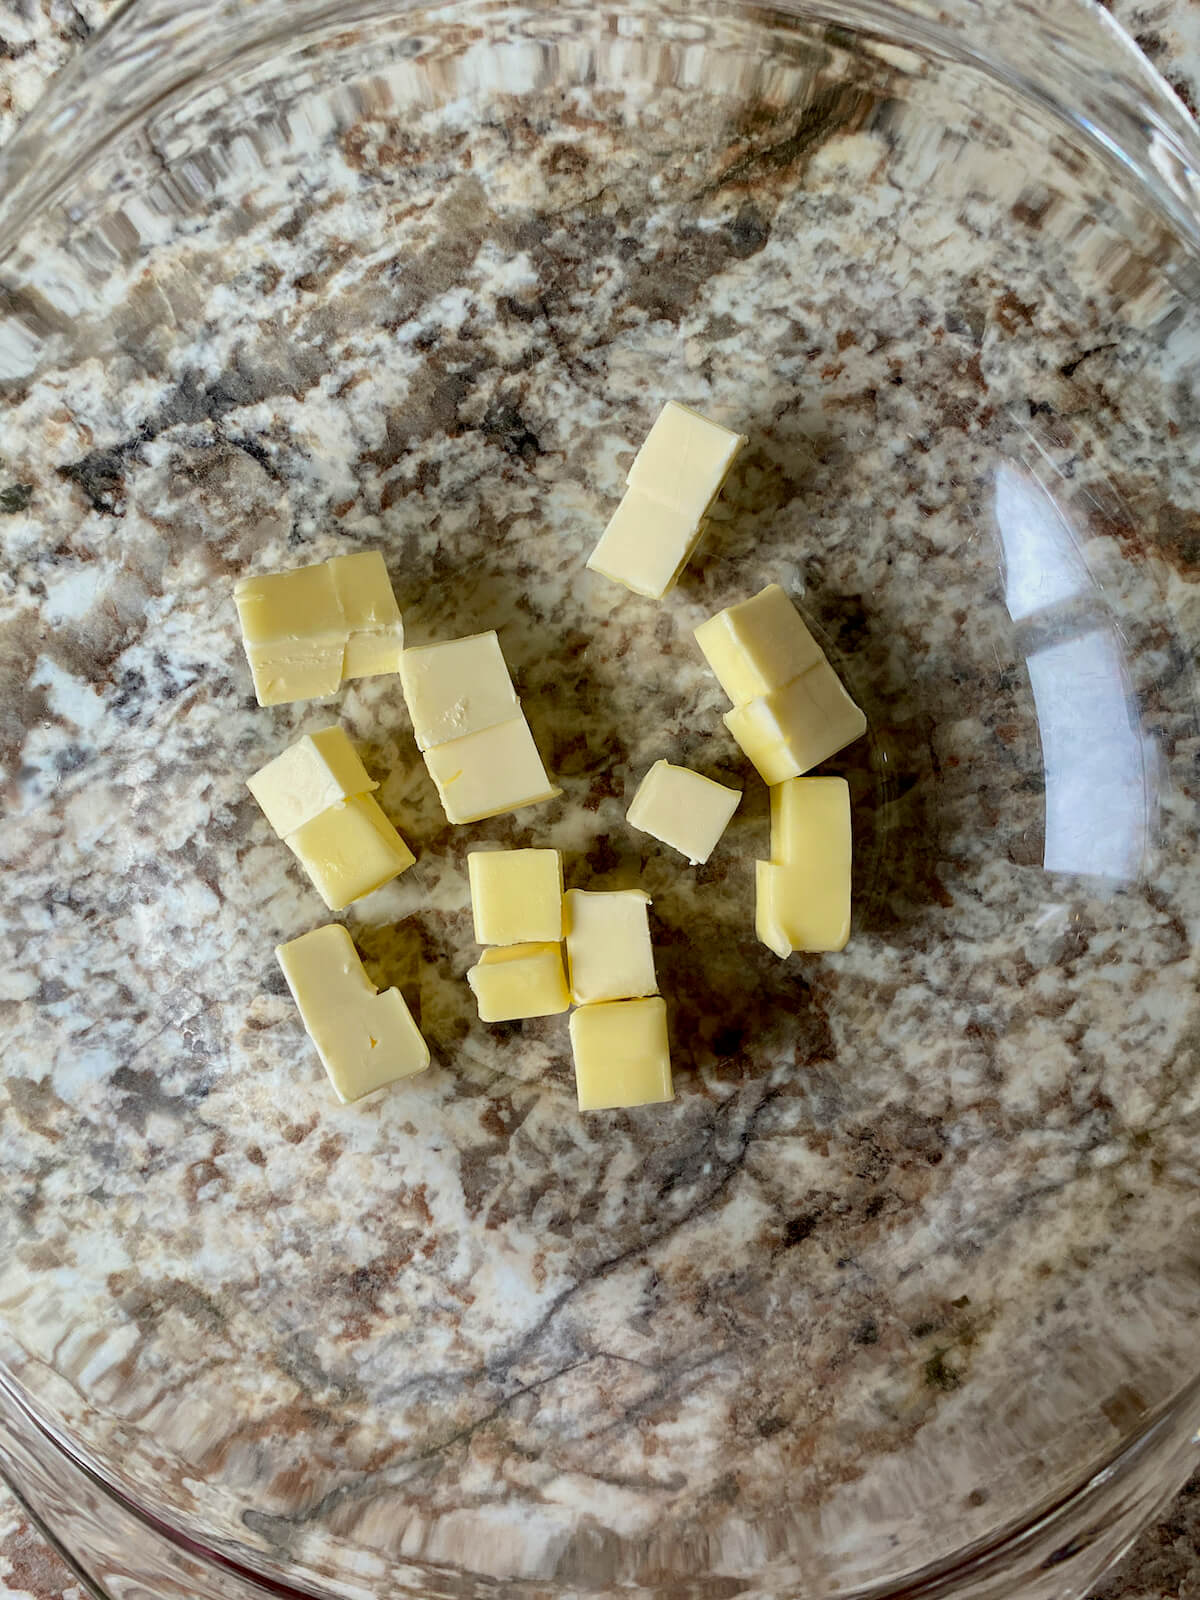 Cubed butter in a glass bowl.